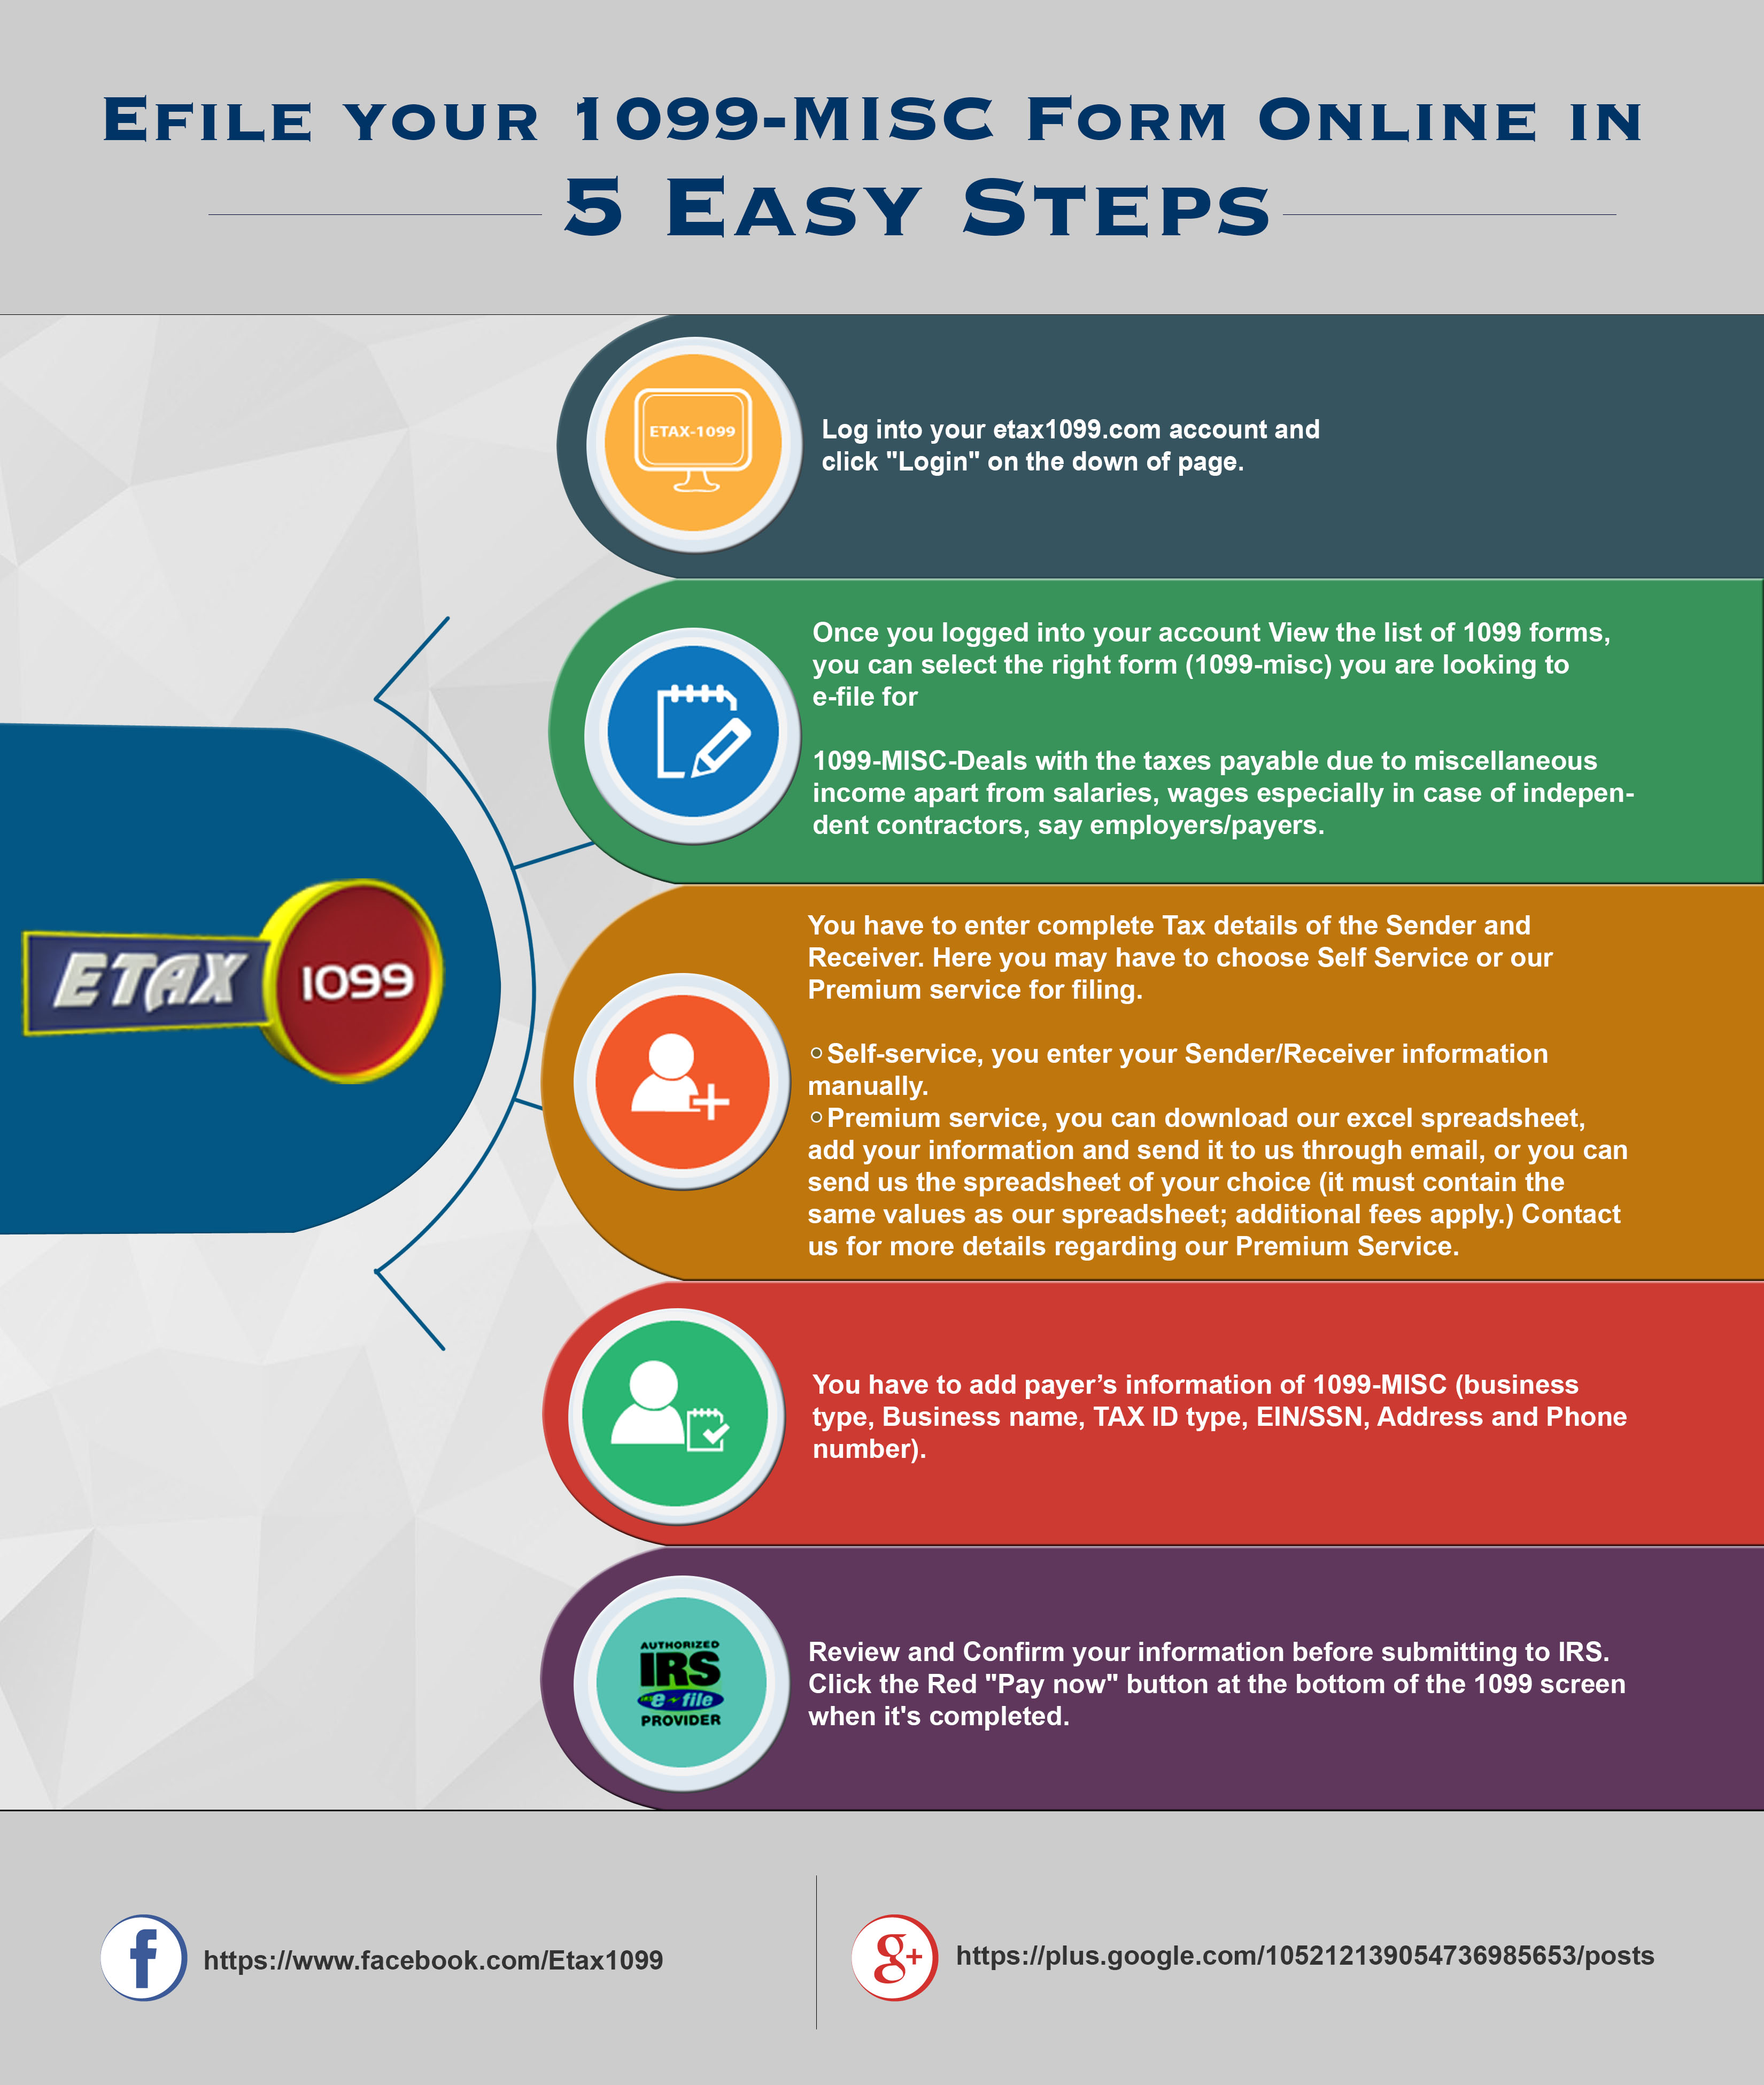 5 Simple Steps to Efile your 1099-MISC Form Online